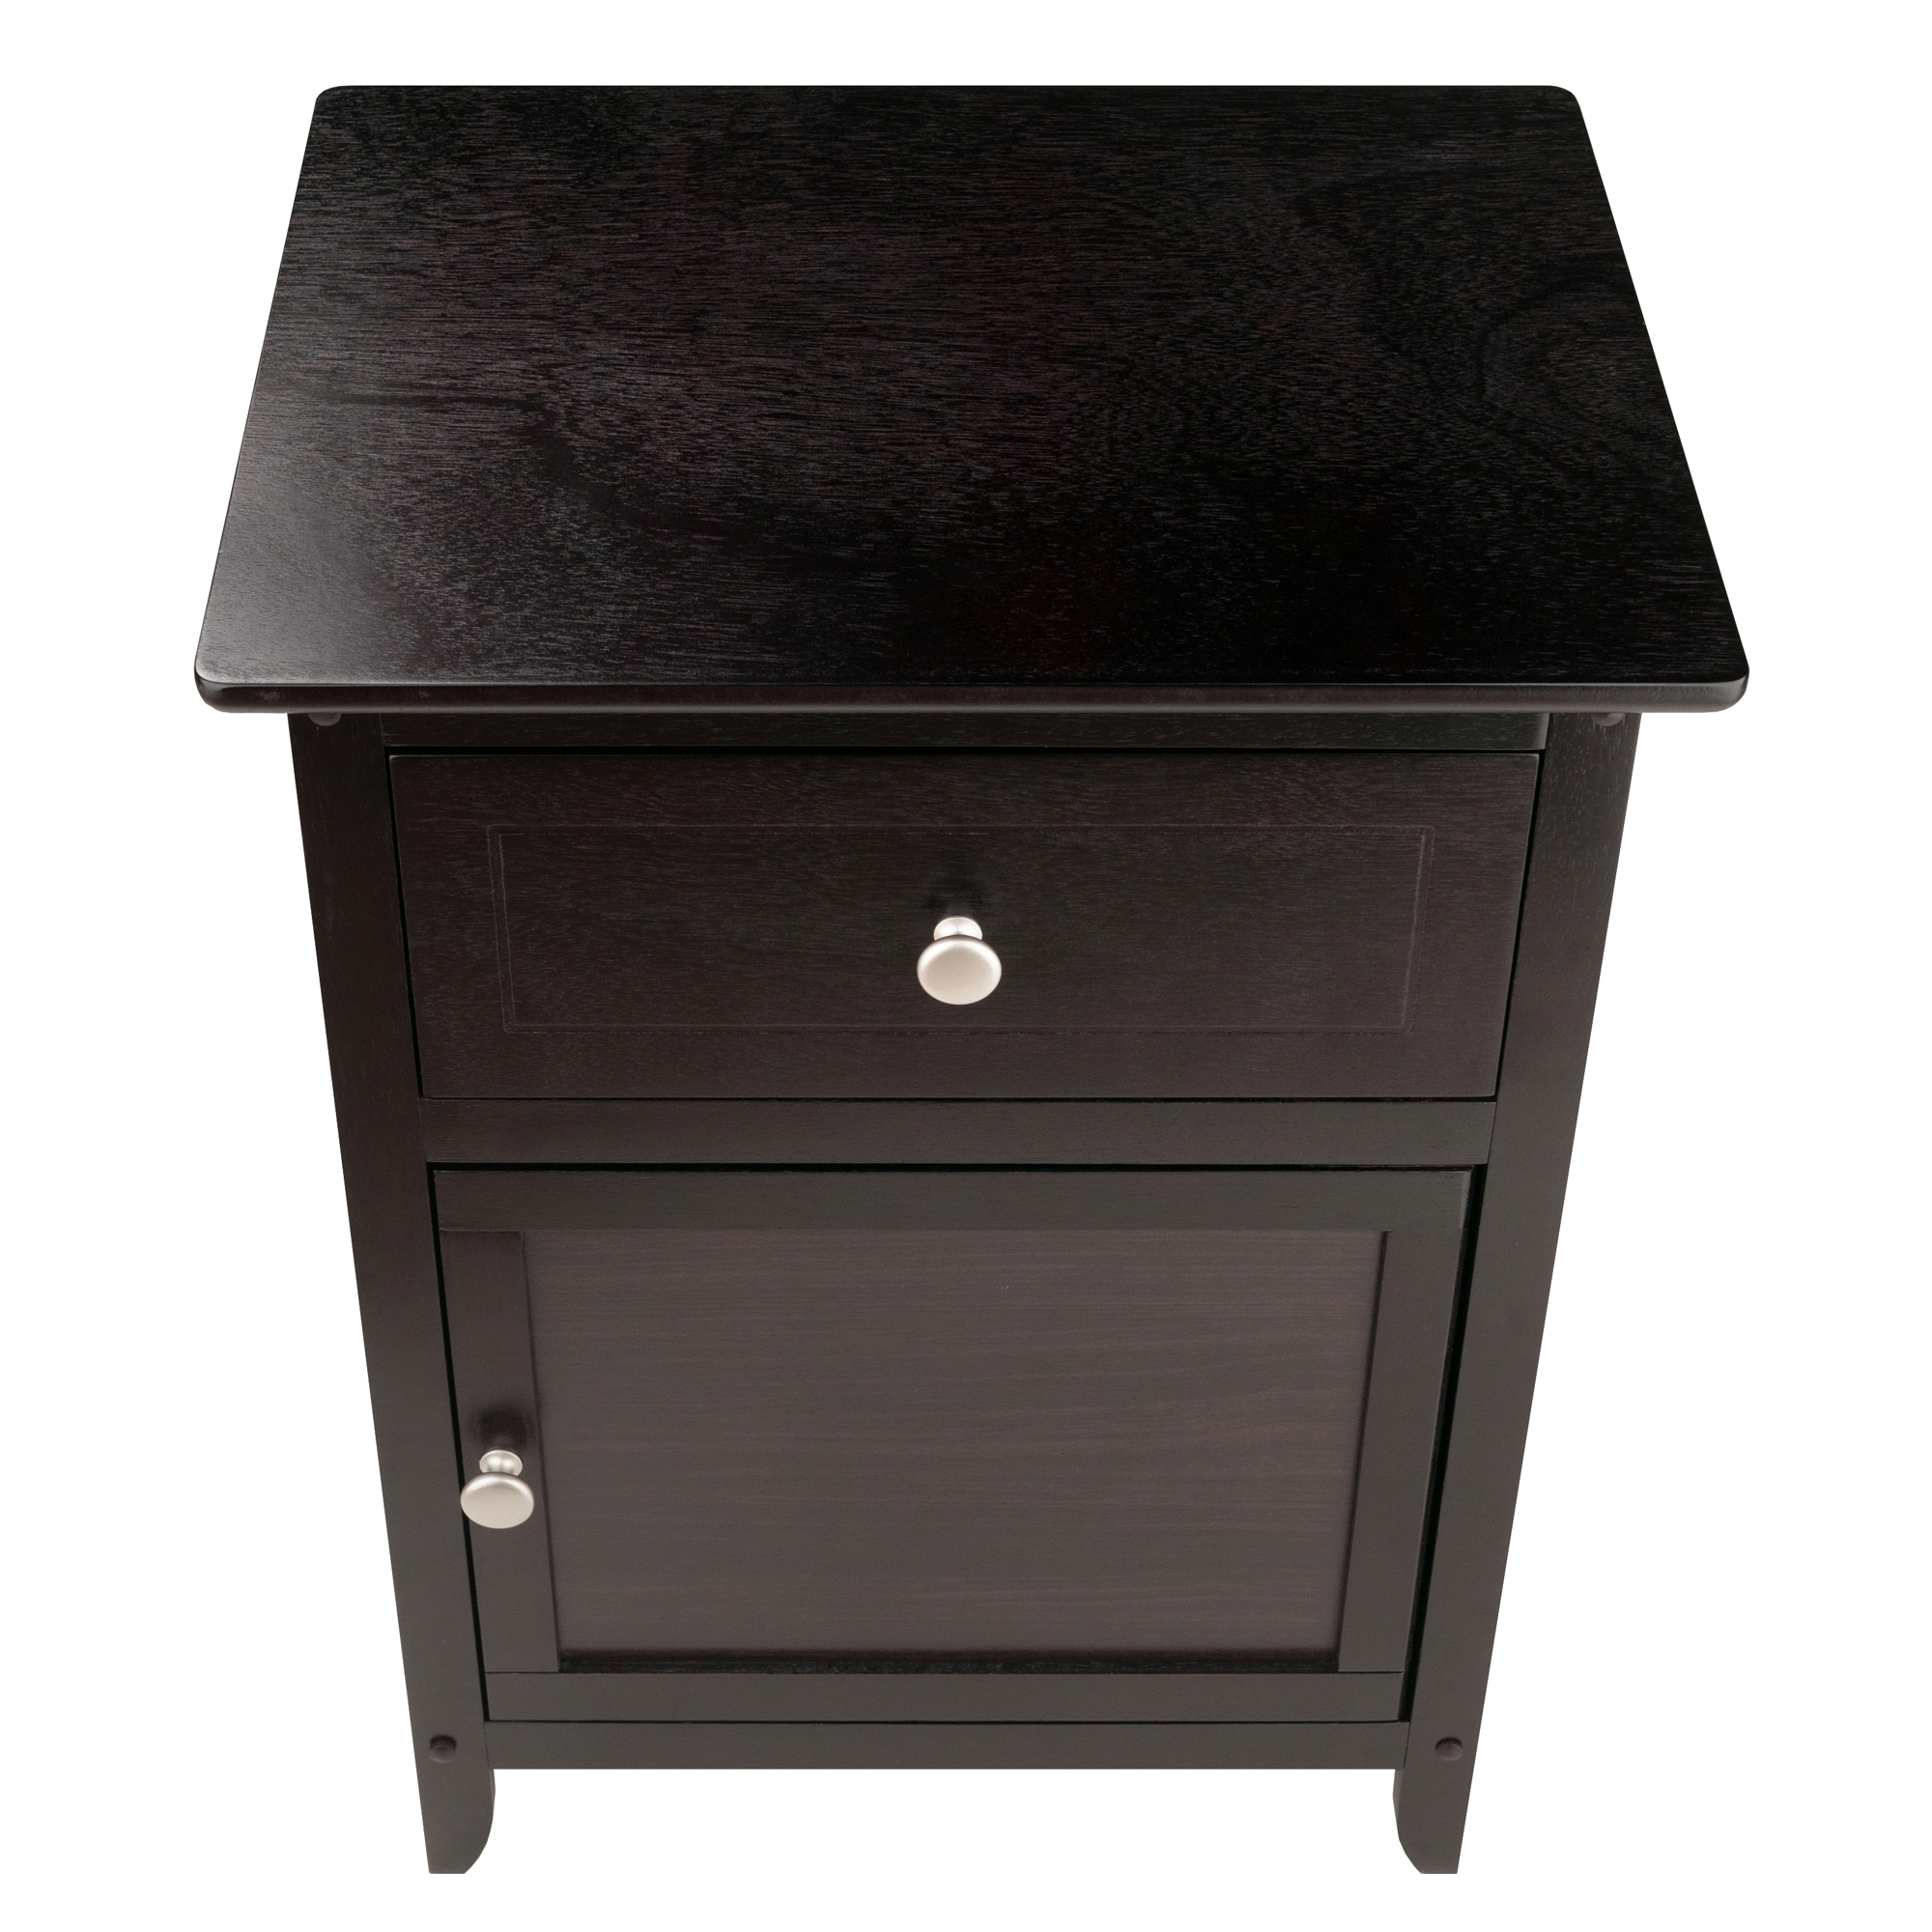 Winsome Wood Eugene Accent Table, Nightstand, Espresso Finish - image 3 of 9